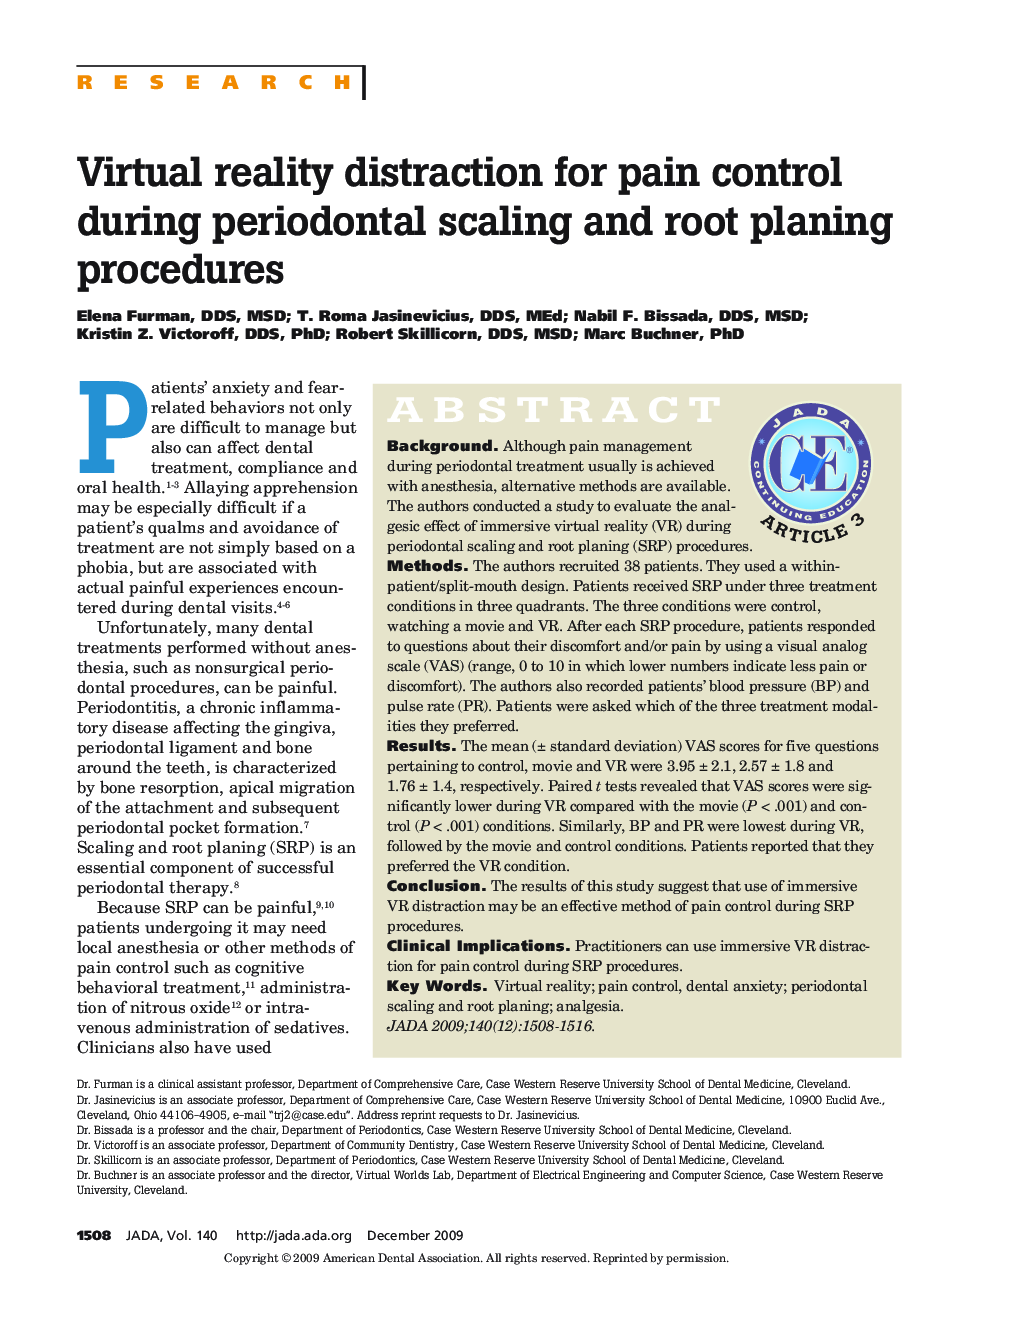 Virtual Reality Distraction for Pain Control During Periodontal Scaling and Root Planing Procedures 